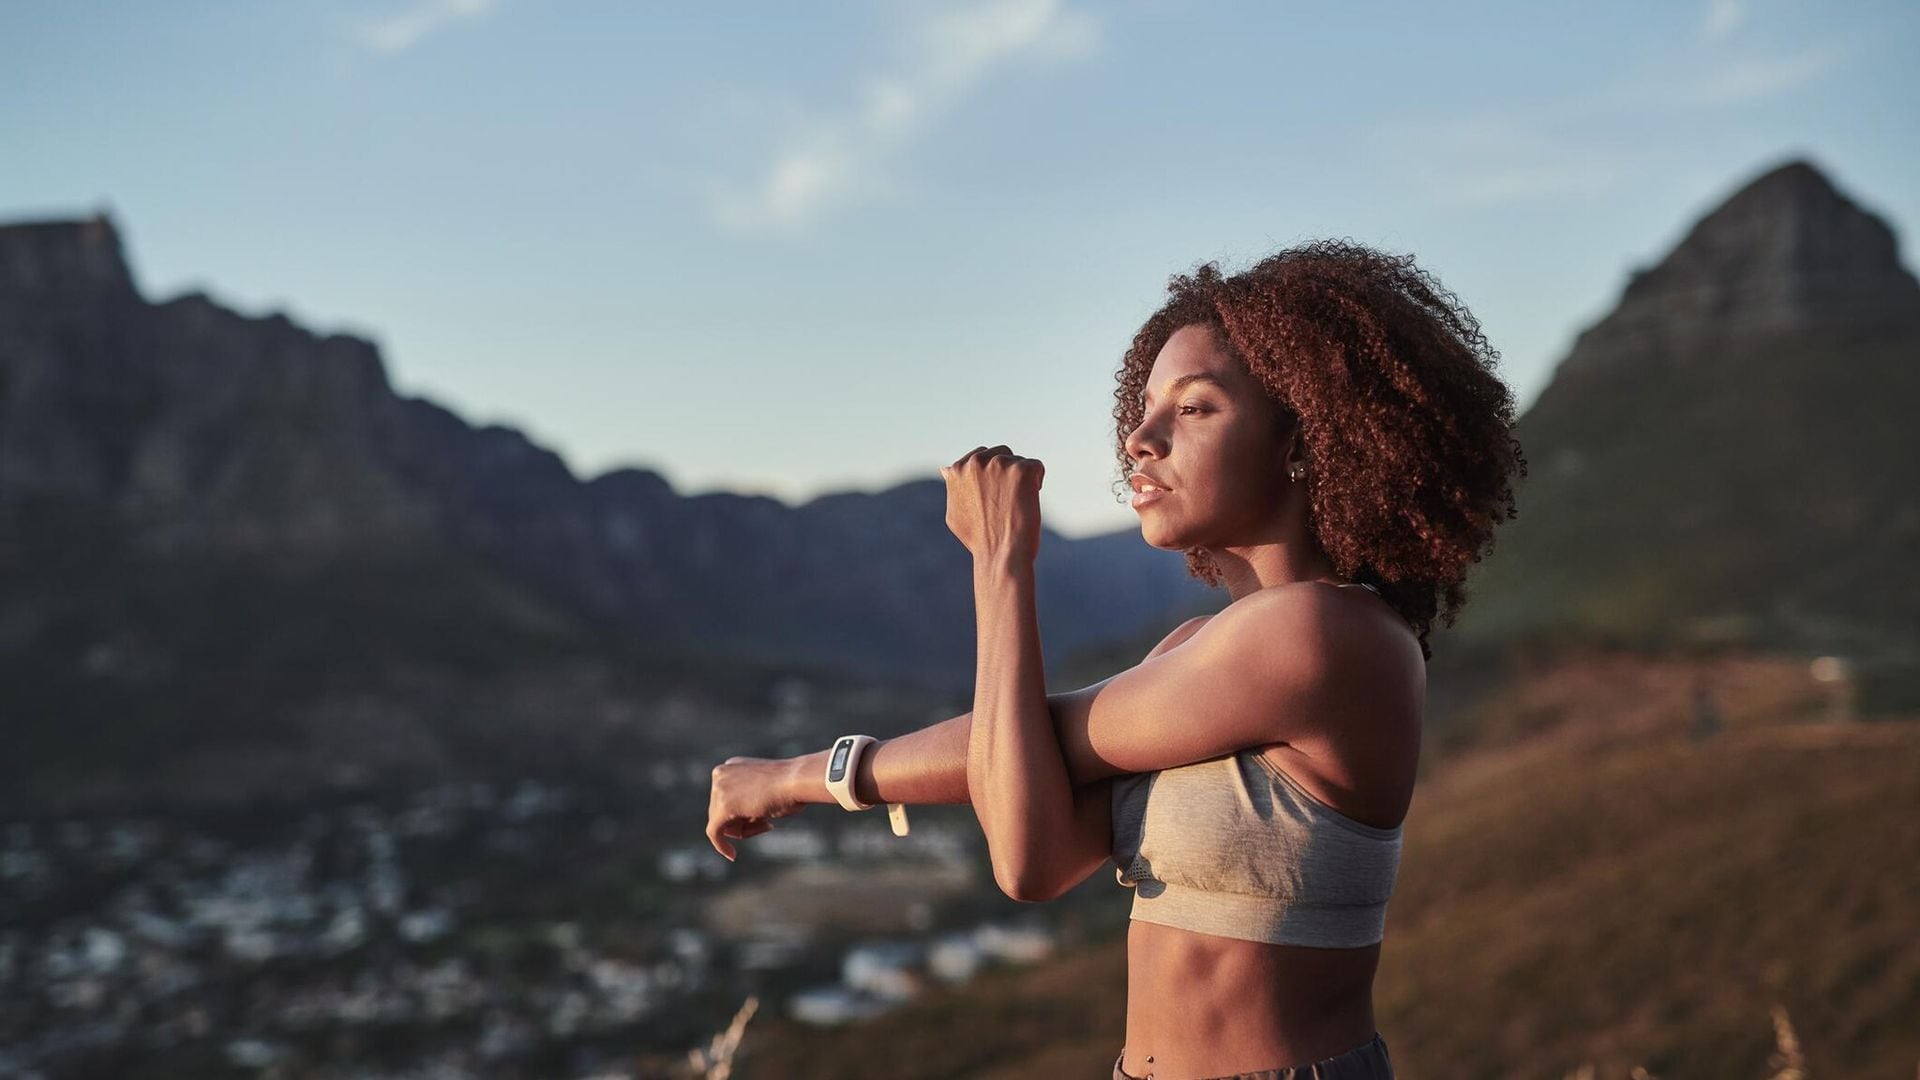 shot of a young woman stretching while out for a workout on a mountain road